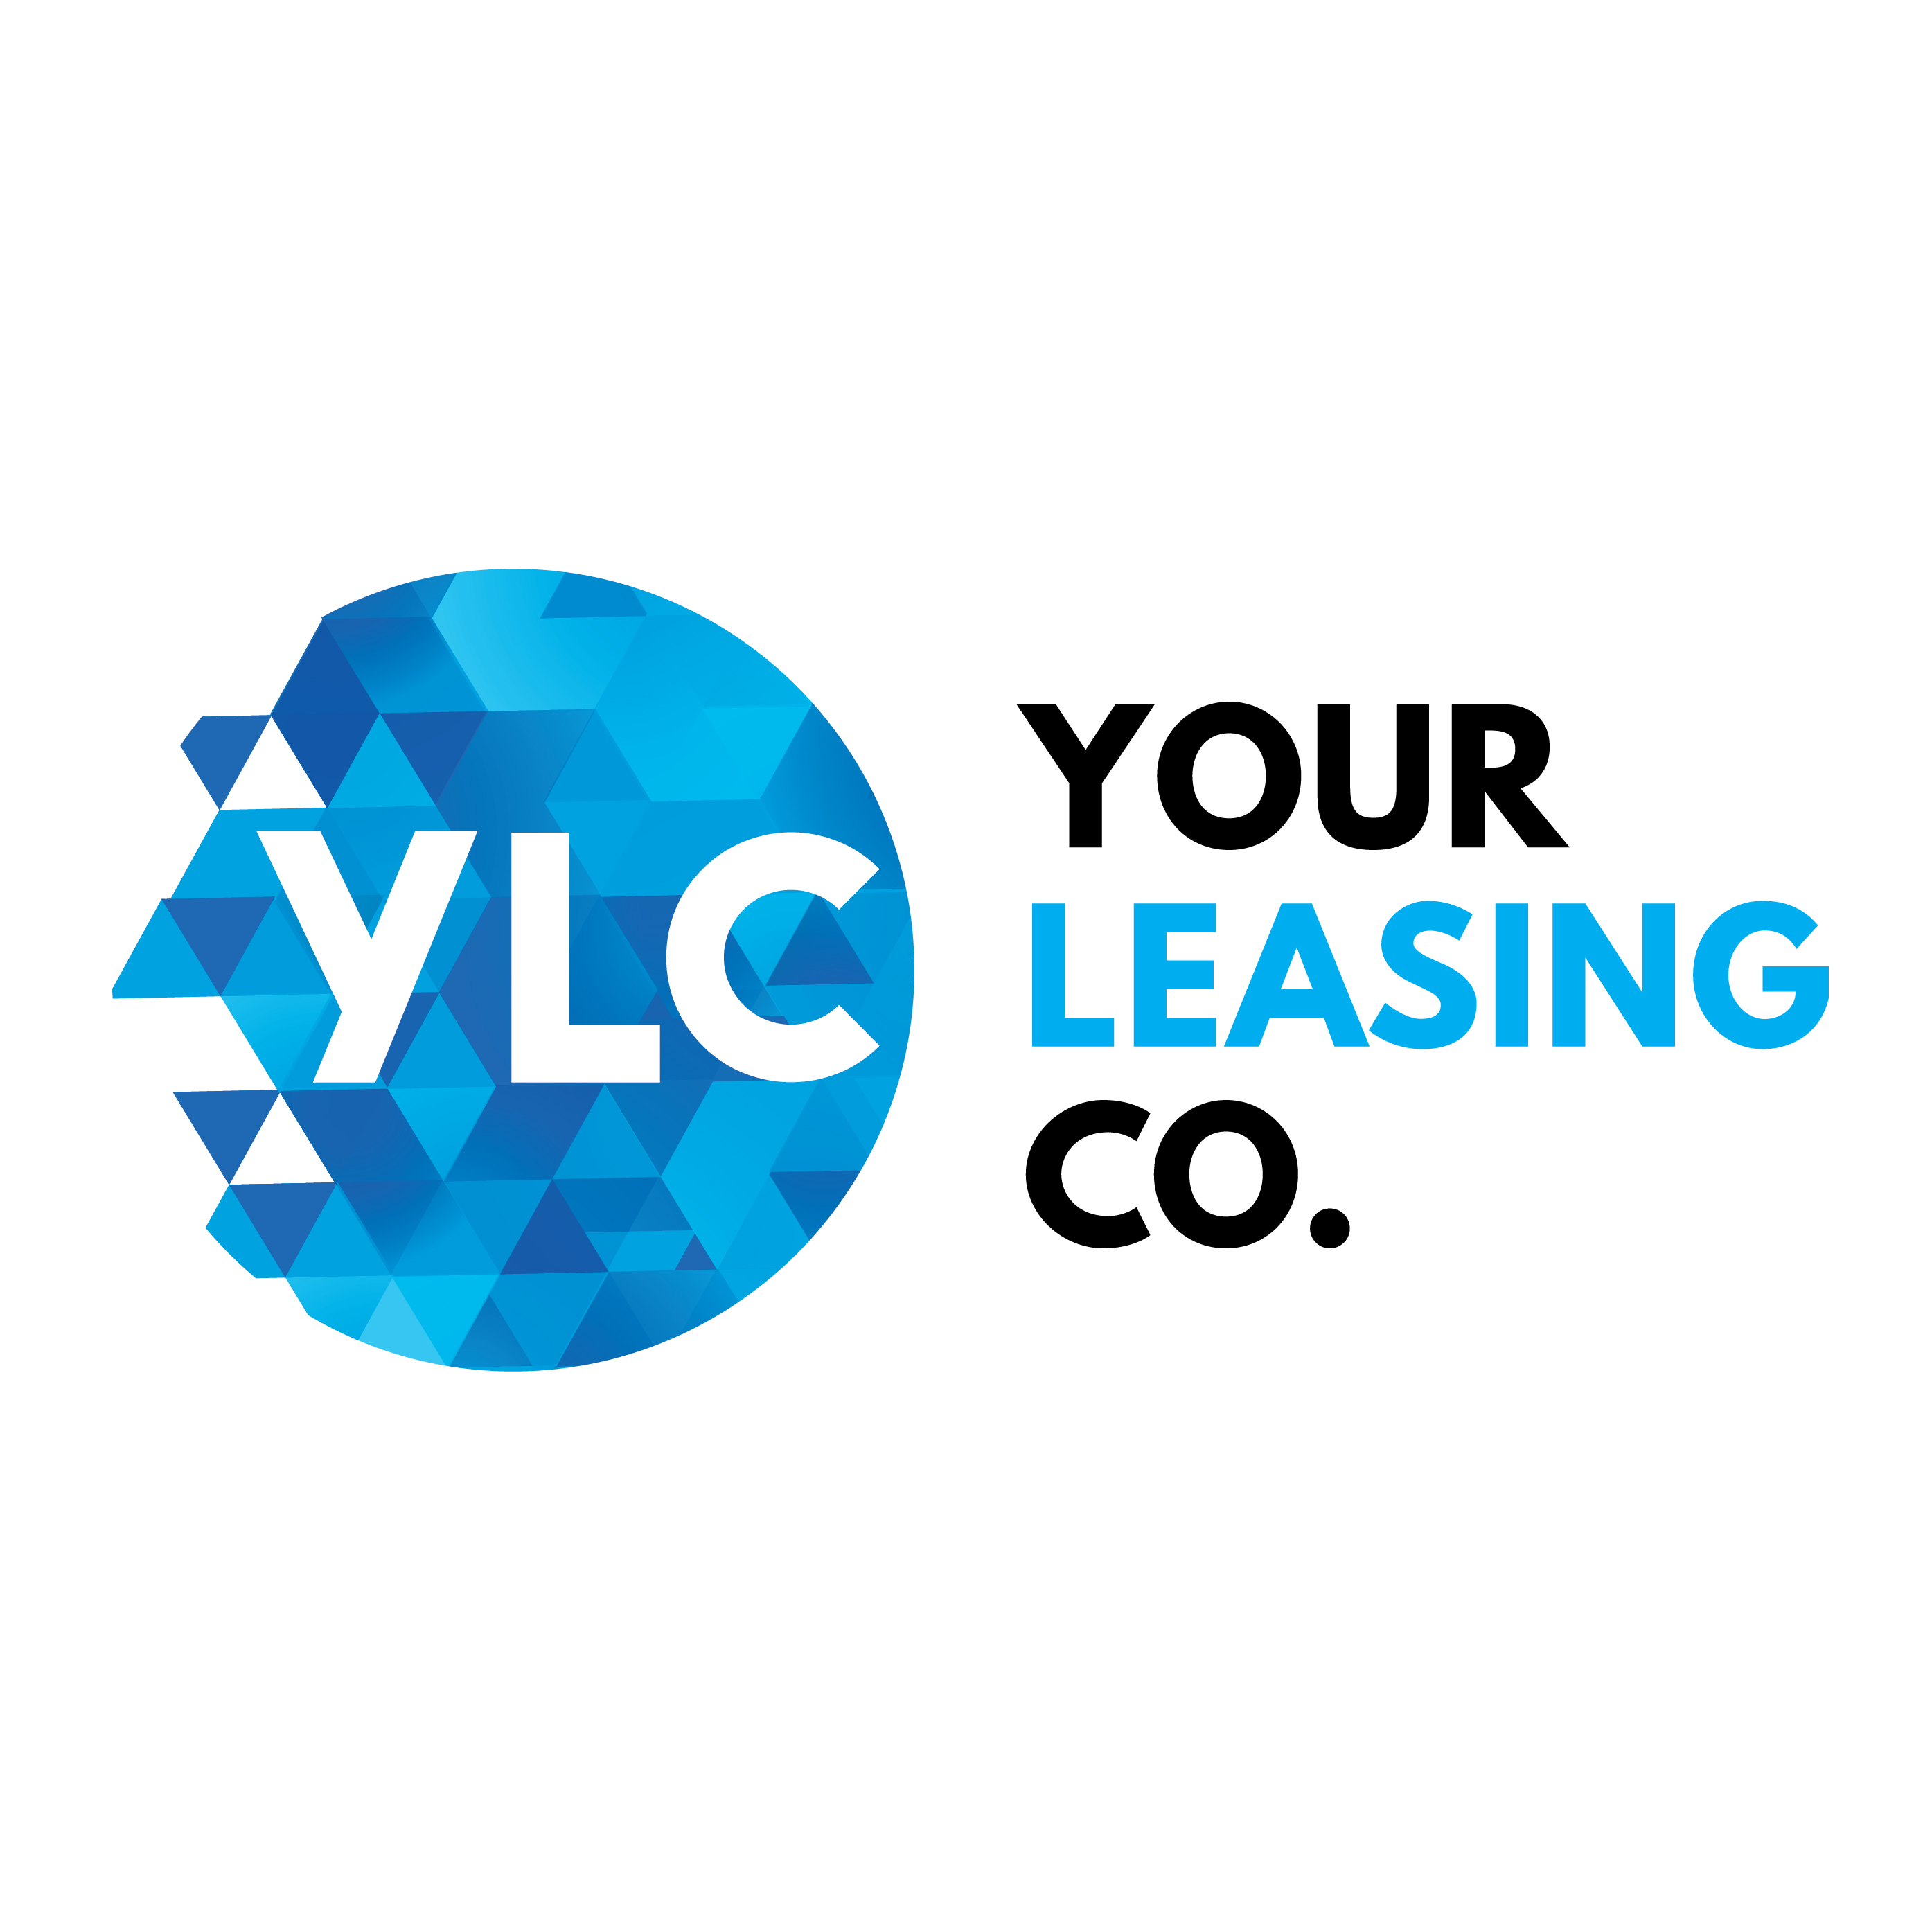 SUPPLIER MEMBER your leasing co 154 revised